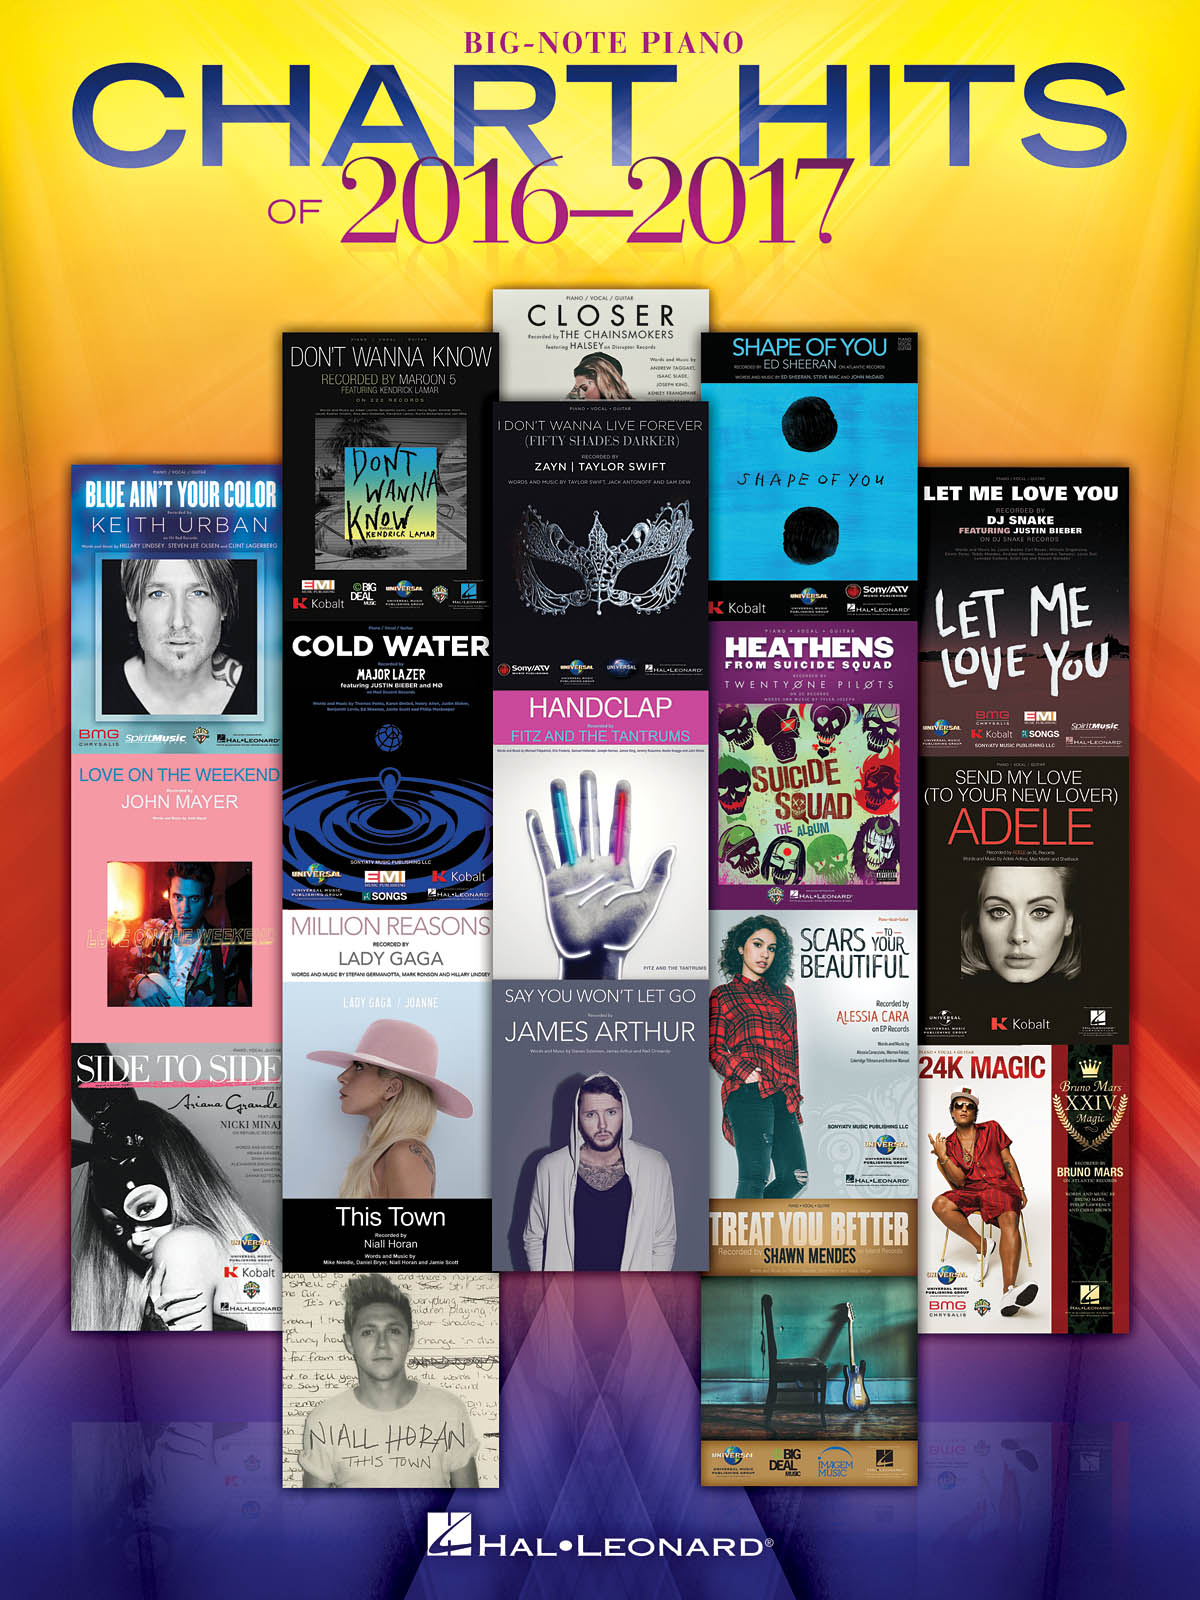 Big Note Songbook: Chart Hits of 2016-2017